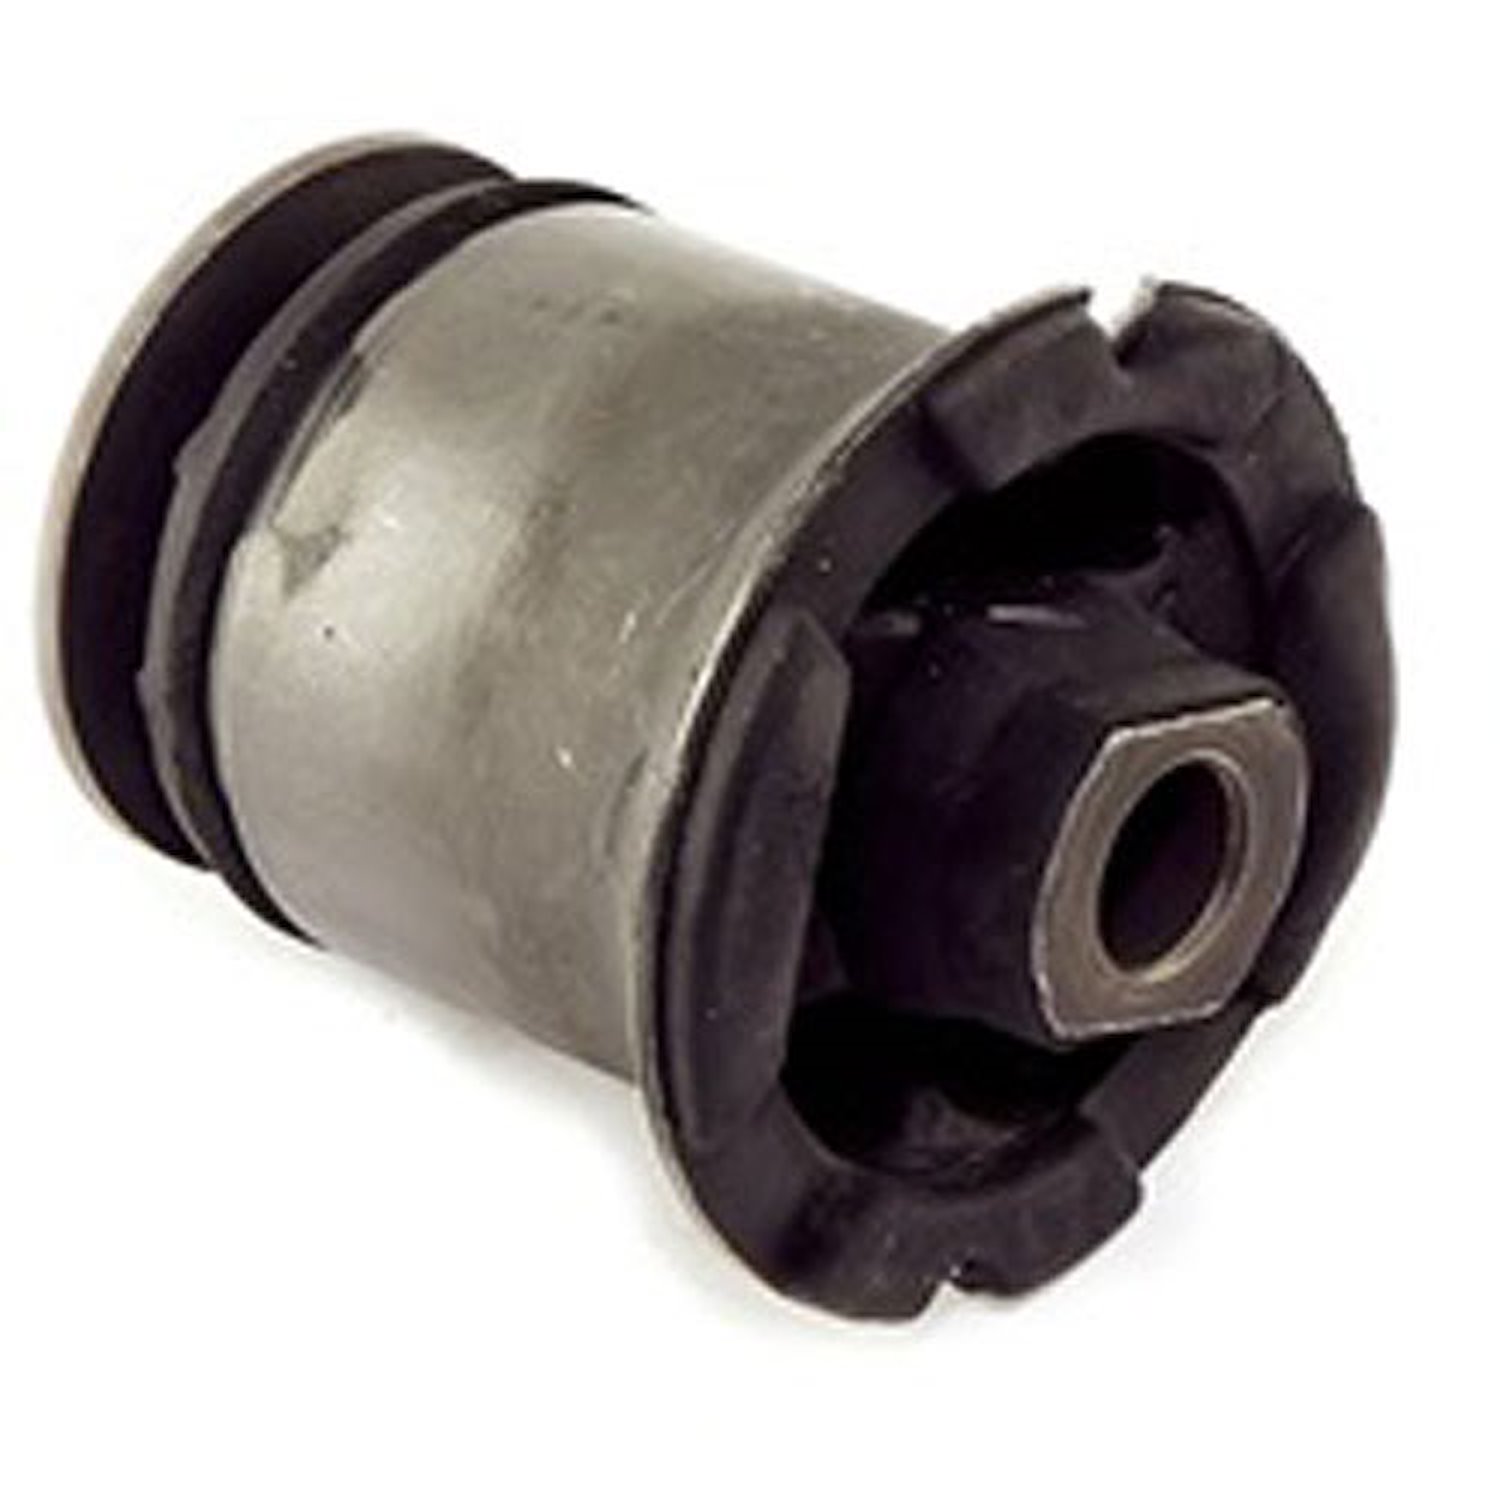 Replacement upper front control arm bushing from Omix-ADA, Fits 00-01 Jeep Cherokees 93-98 Grand